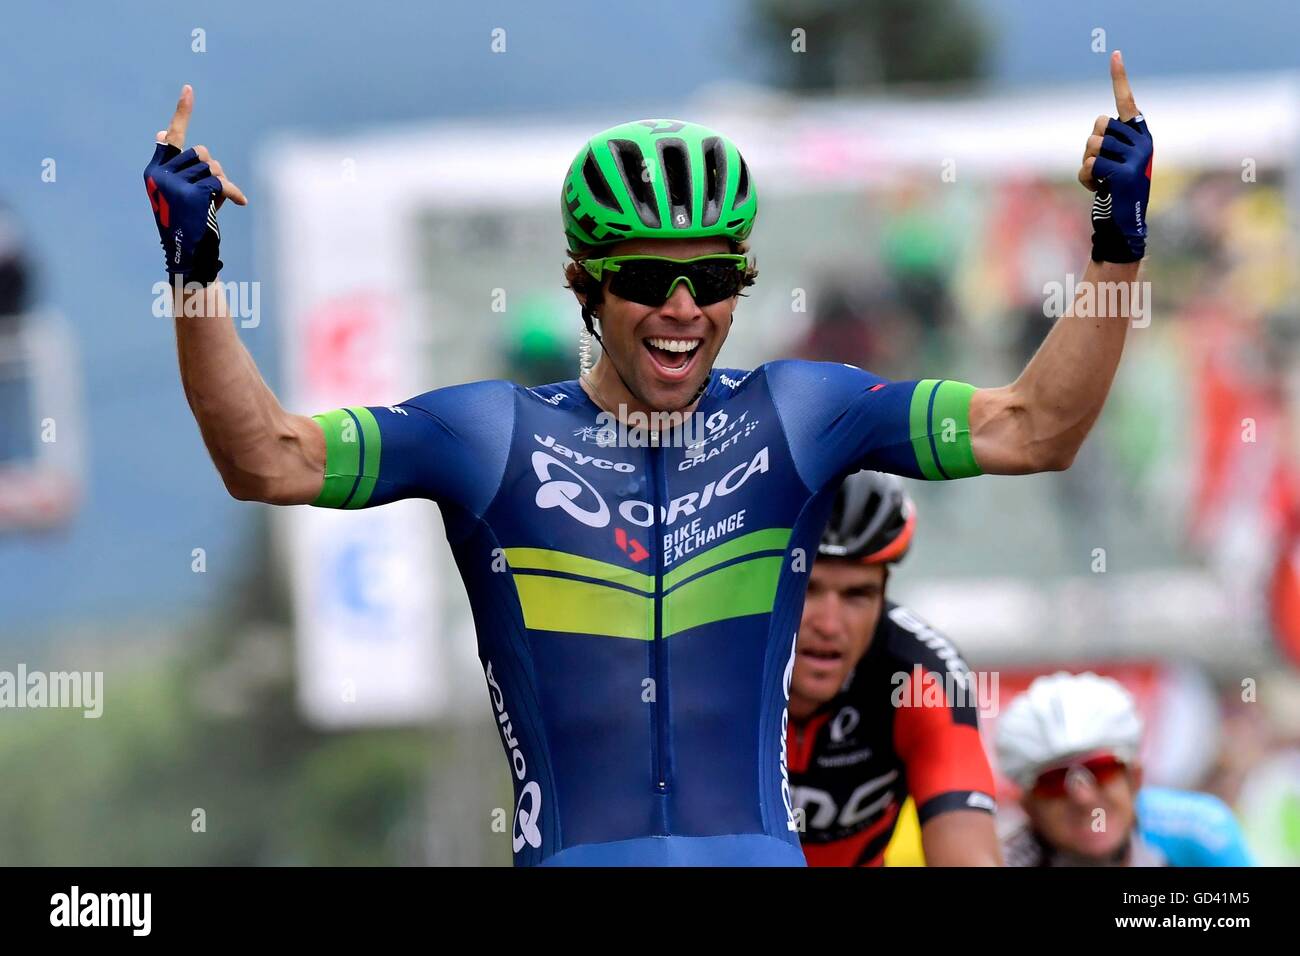 France. 12th July, 2016. Escaldes Engordany to Revel, France. Tour de France, stage 10.  MATTHEWS Michael (AUS) of ORICA BikeExchange celebrates the win in front of SAGAN Peter (SVK) of TINKOFF during stage 10 of the 2016 Tour de France a 197 km stage between Escaldes-Engordany and Revel, Credit:  Action Plus Sports Images/Alamy Live News Stock Photo